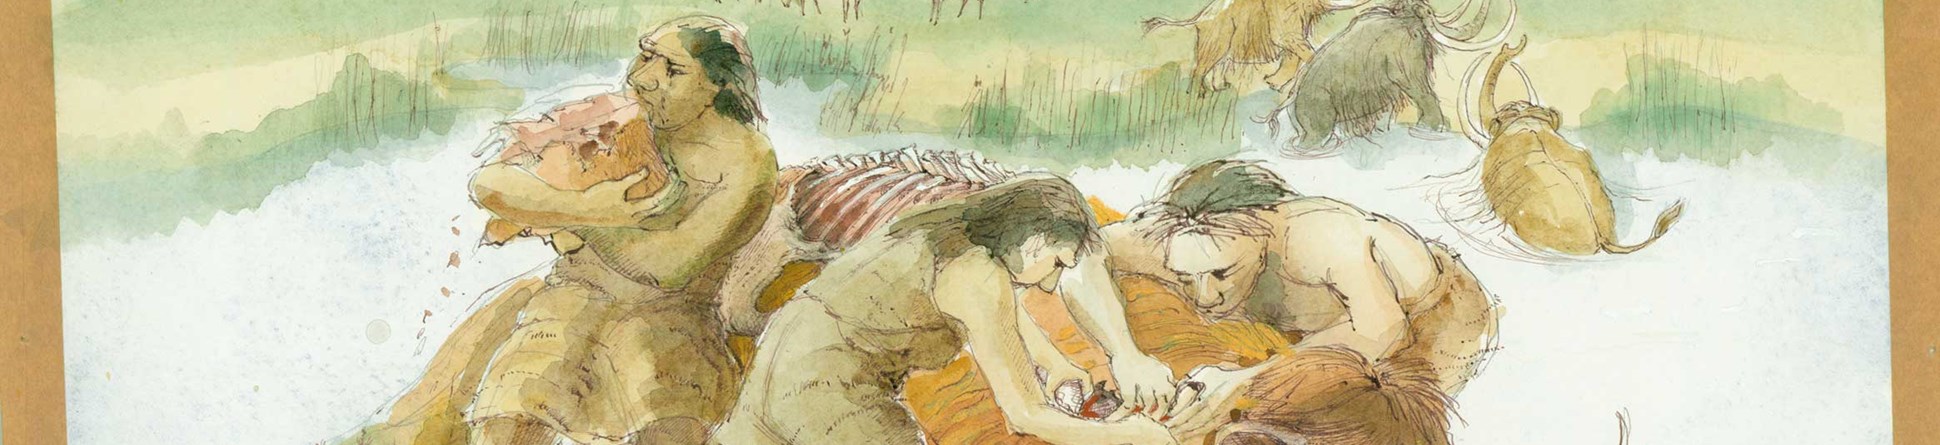 A reconstruction drawing of a group of Neanderthals butchering a mammoth